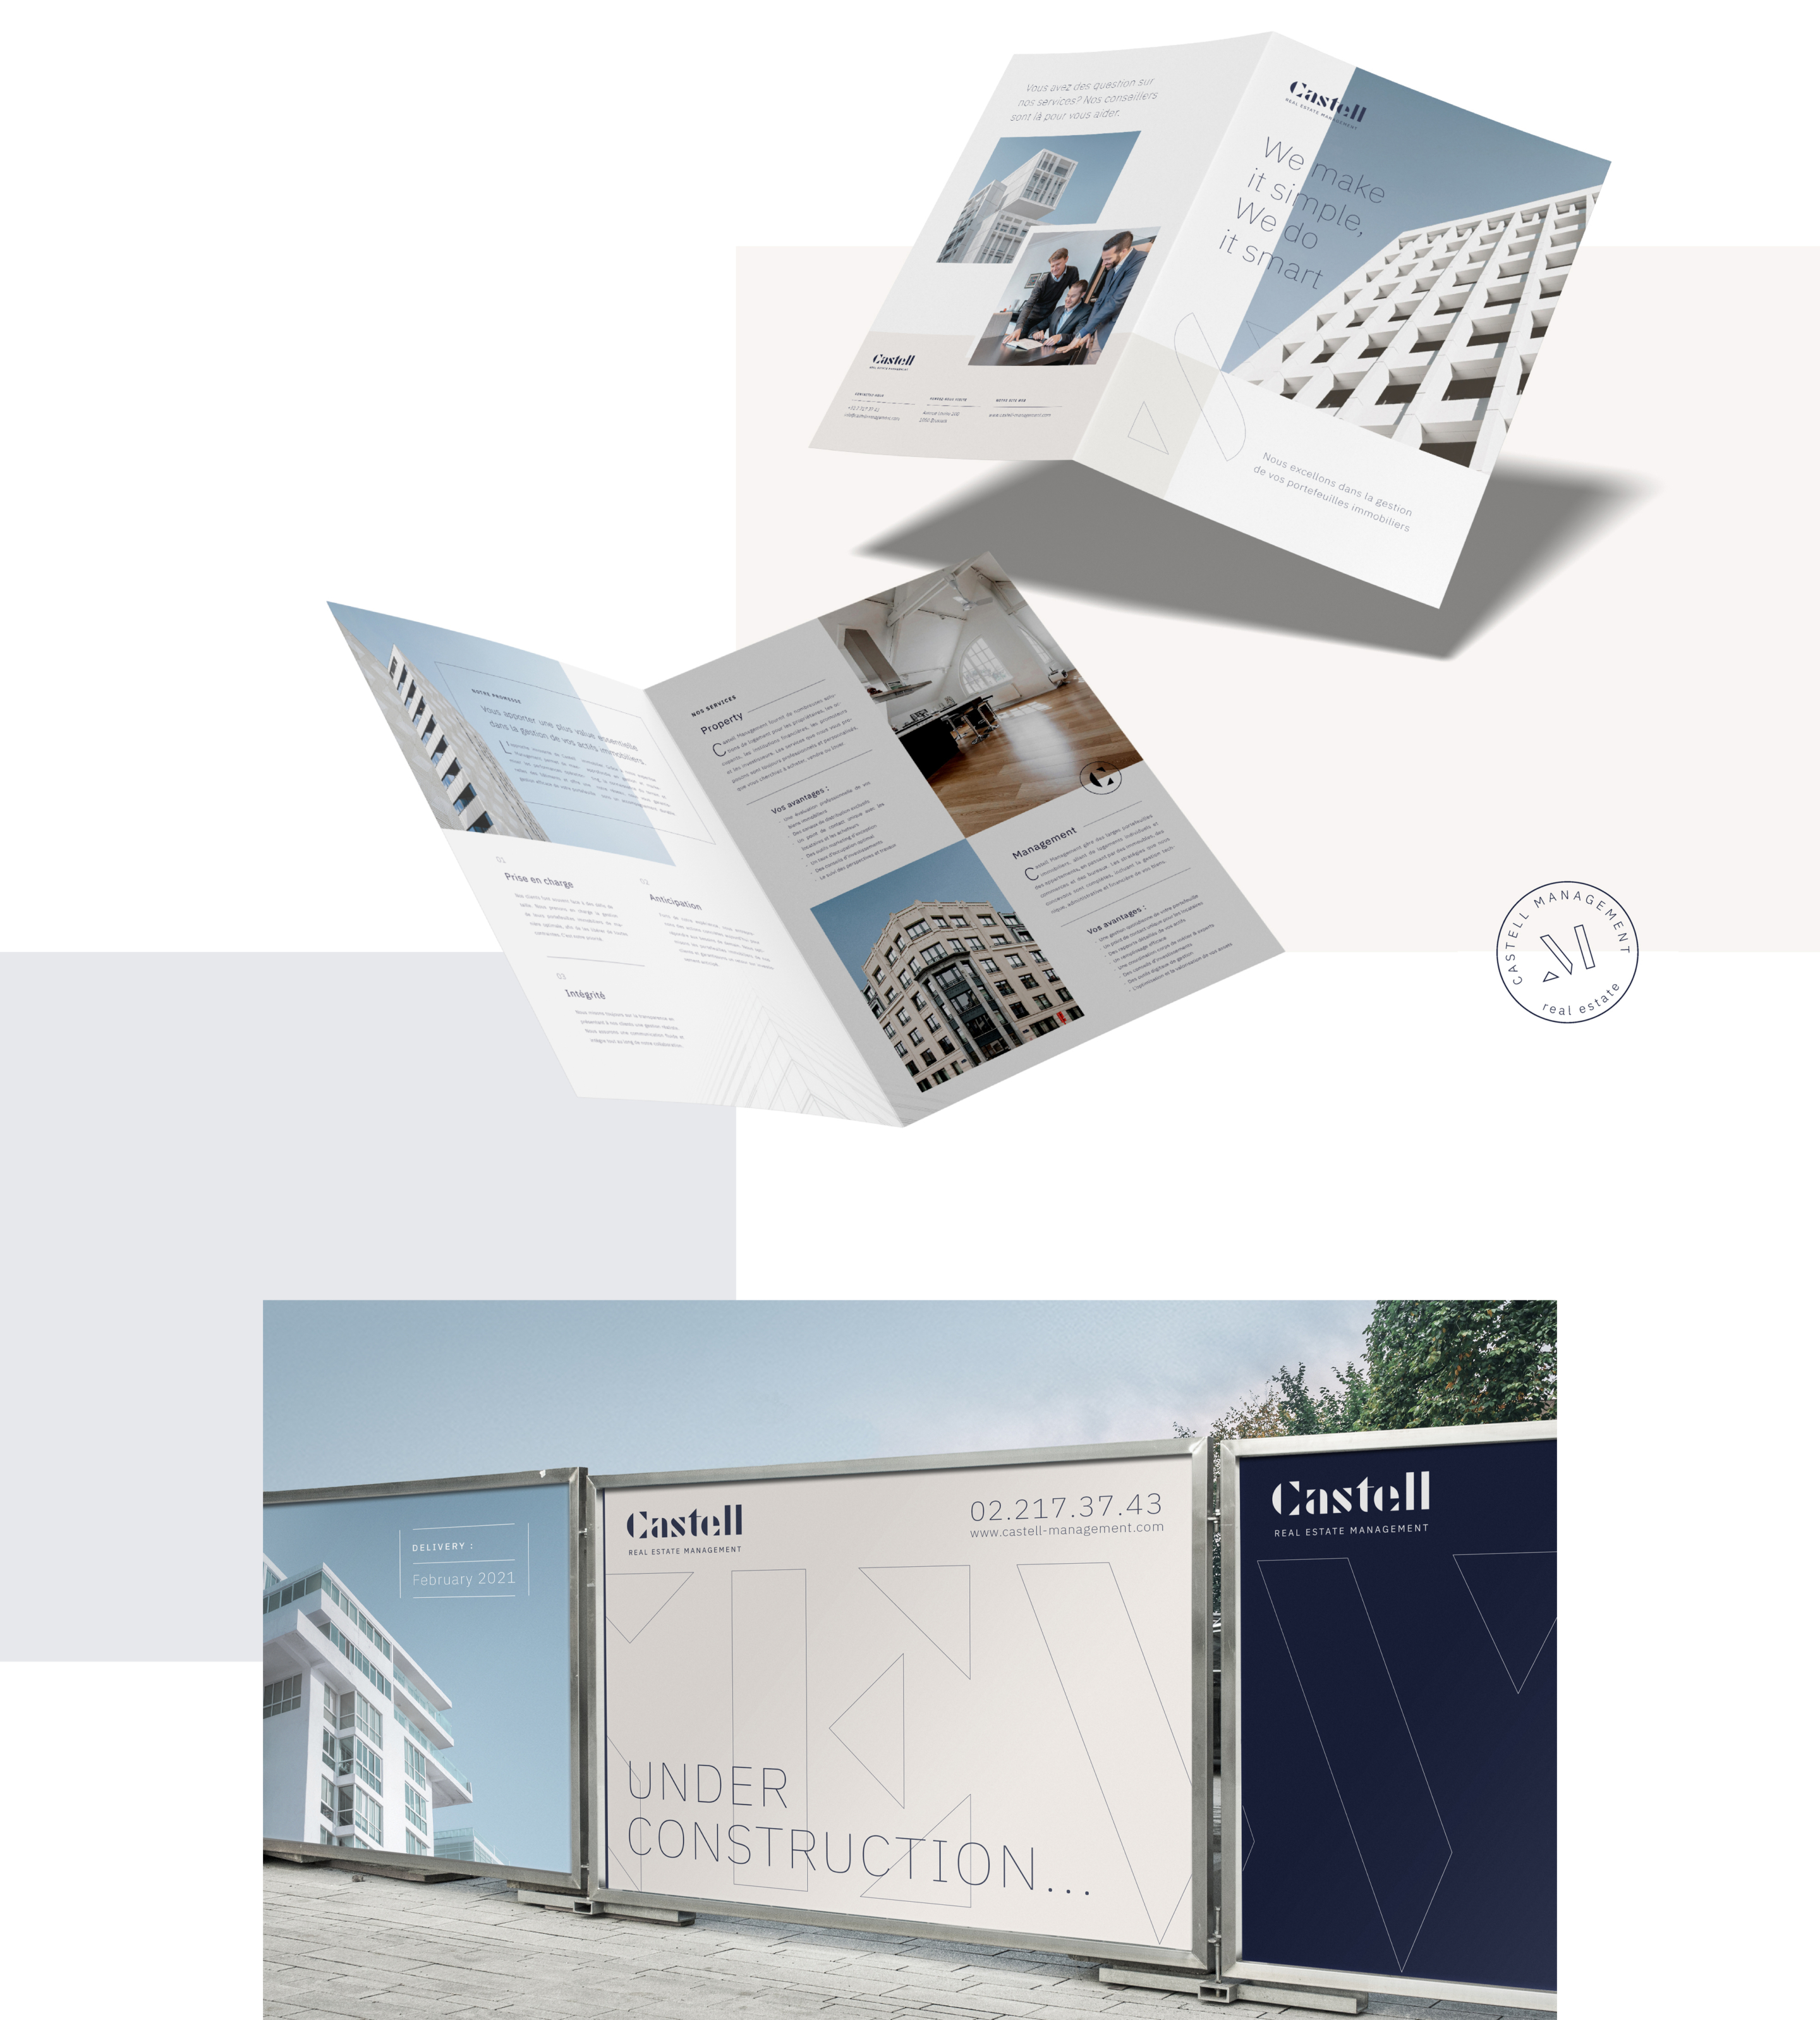 Example of communication materials produced for Castell Management by our Brussels communications agency